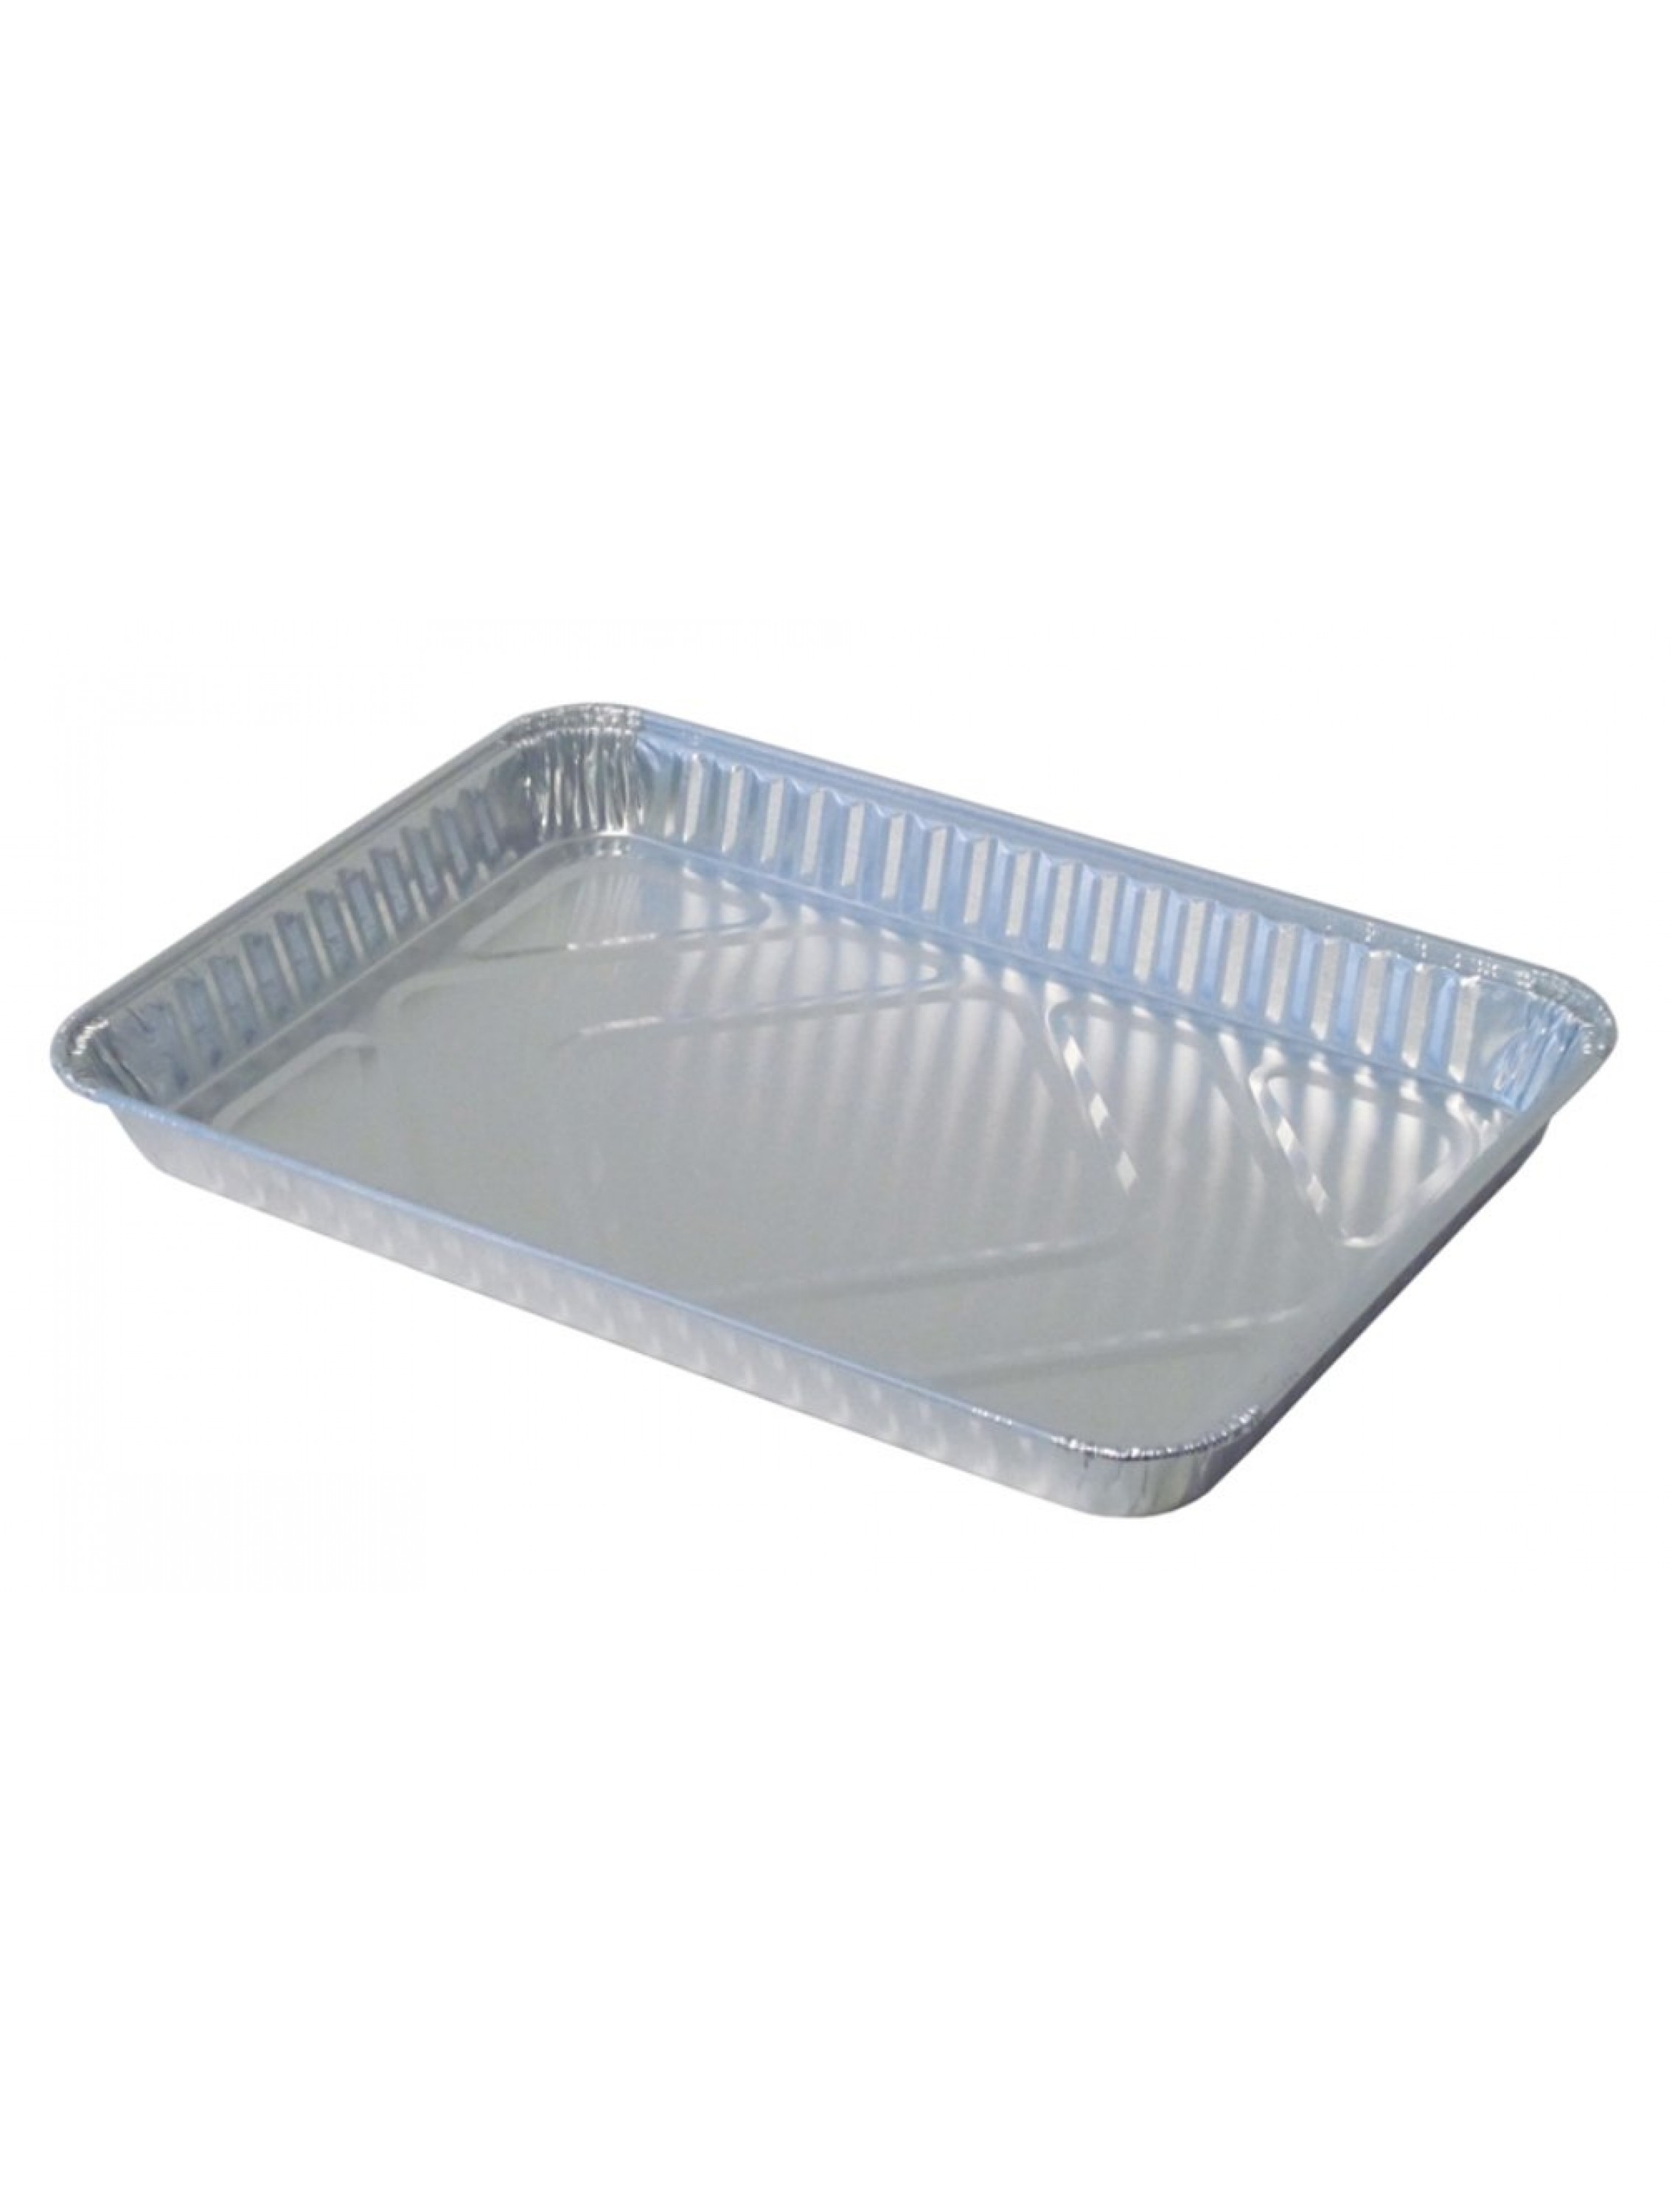 Durable Packaging 1200-45 Disposable Aluminum 1 4-Size Sheet Cake Pan Pack of 100 - BXT8EYQHJ